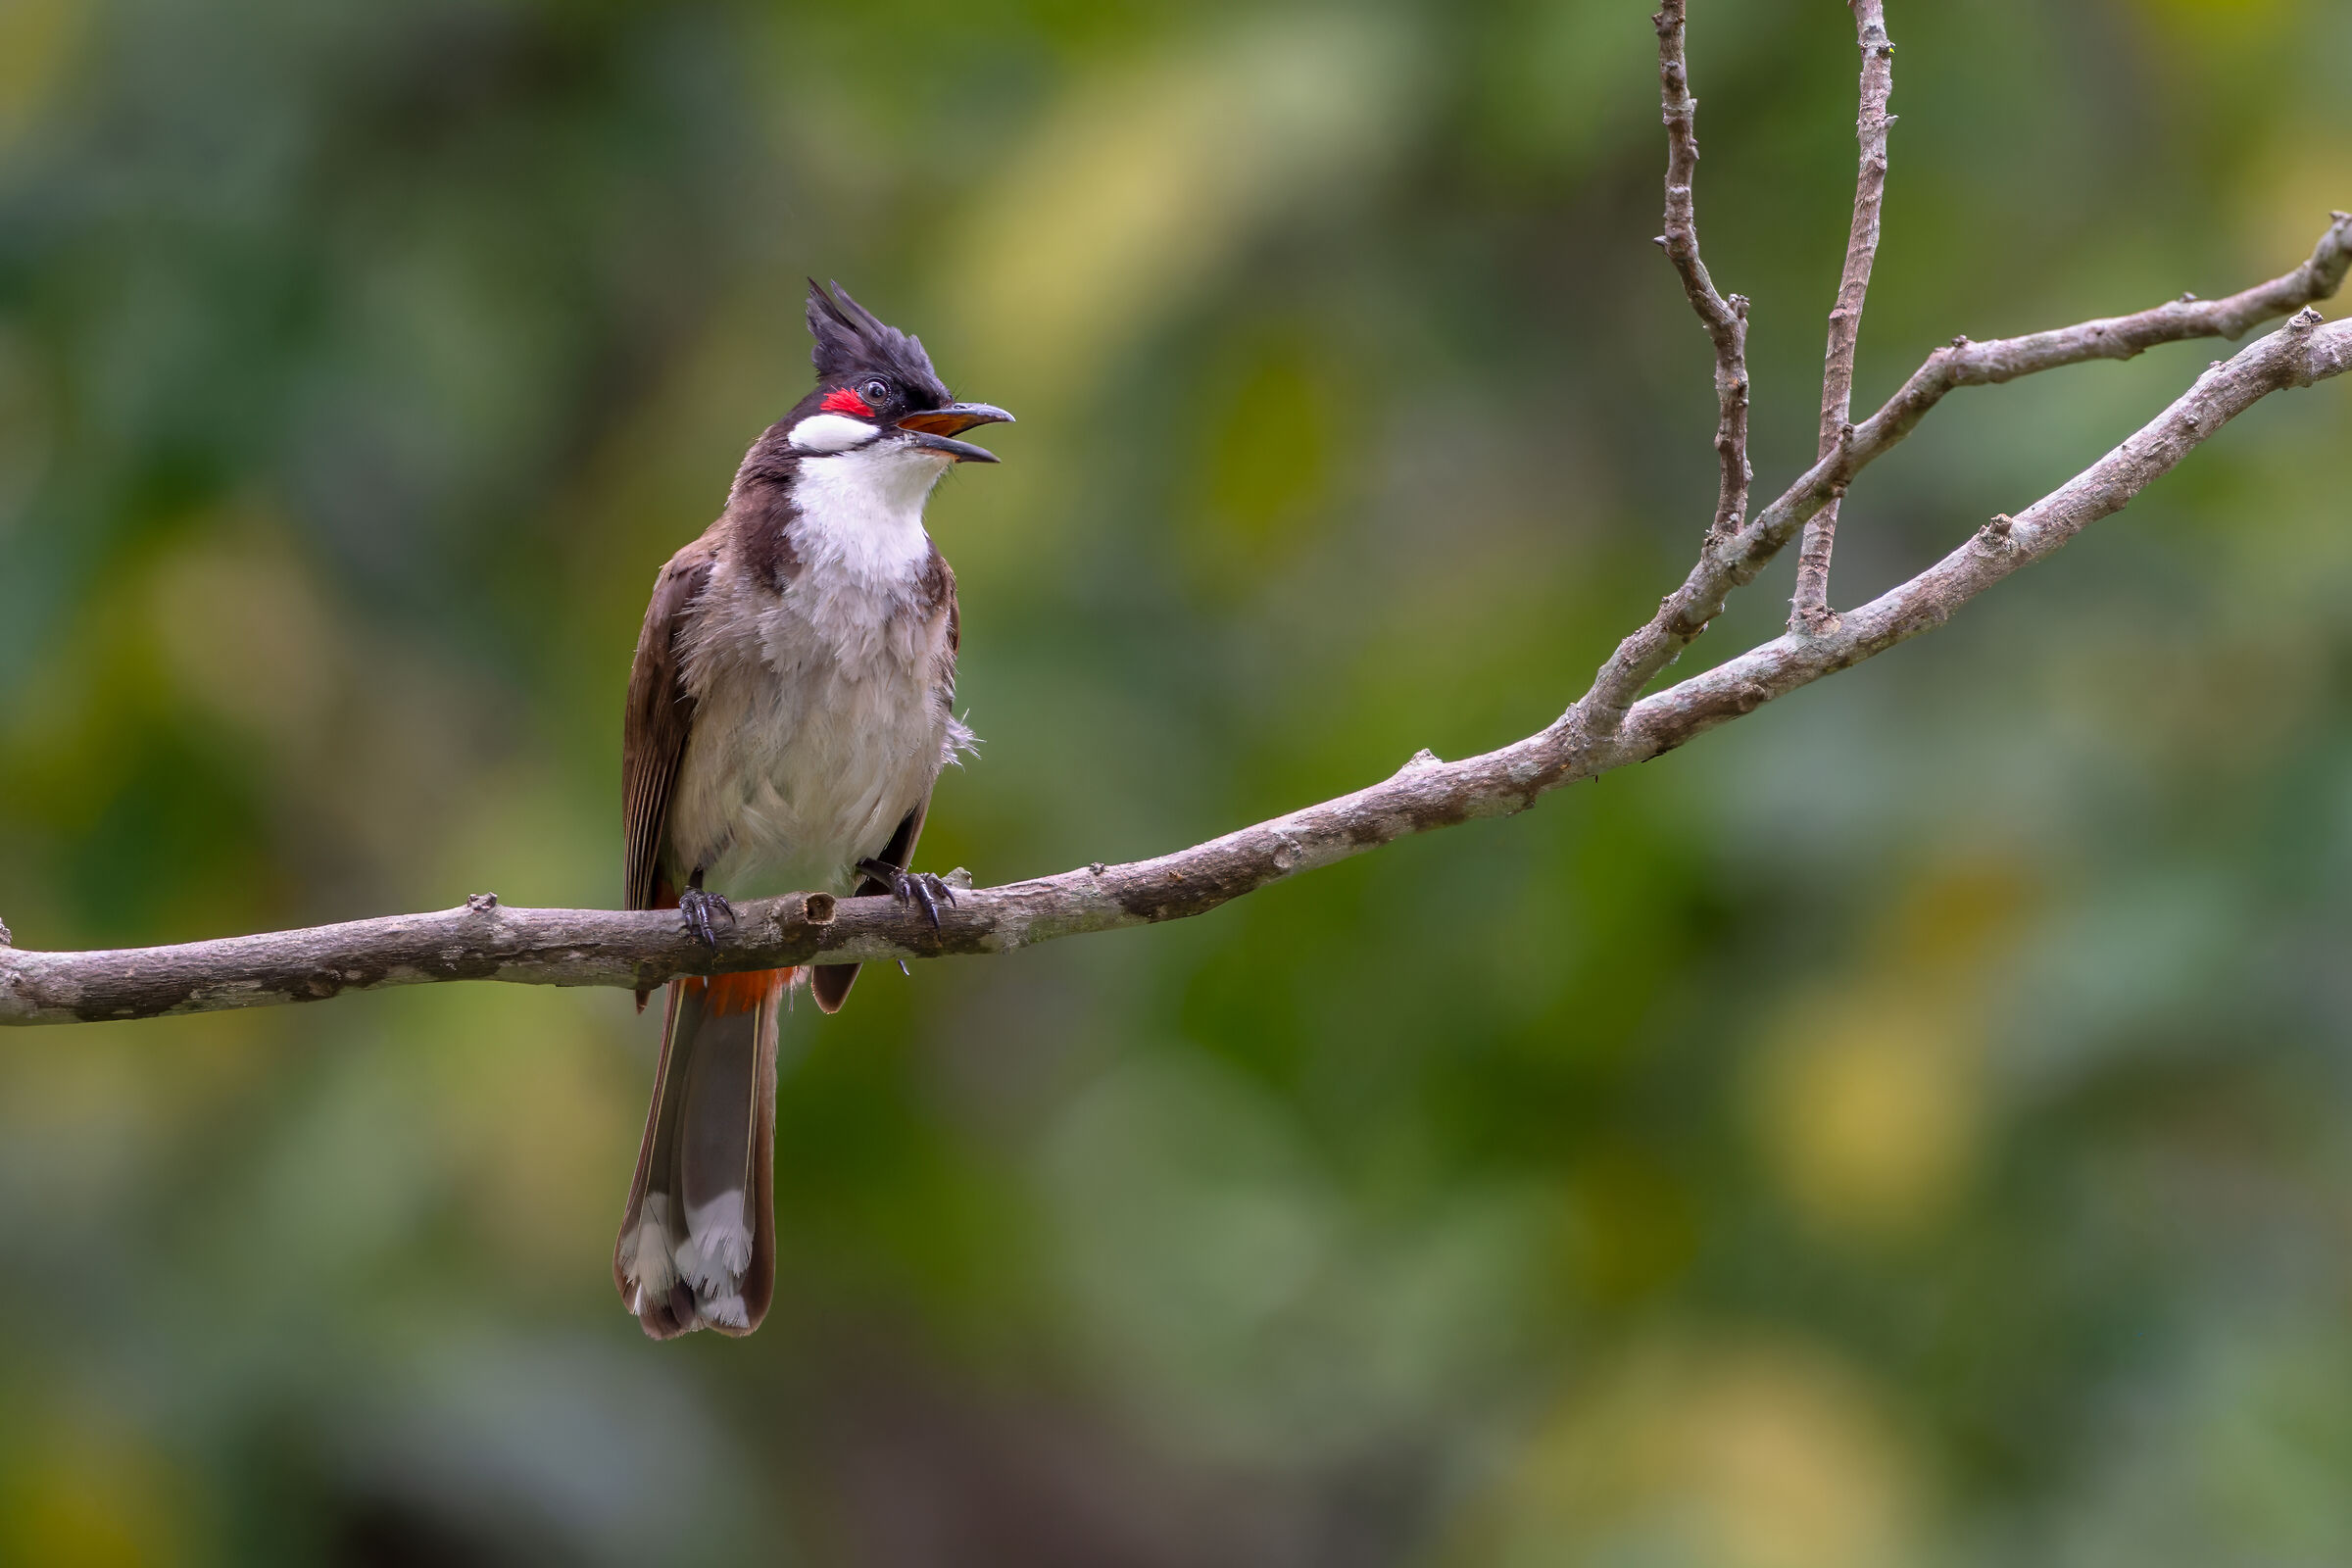 Red-whiskered bulbul (Pycnonotus jocosus), or crested b...